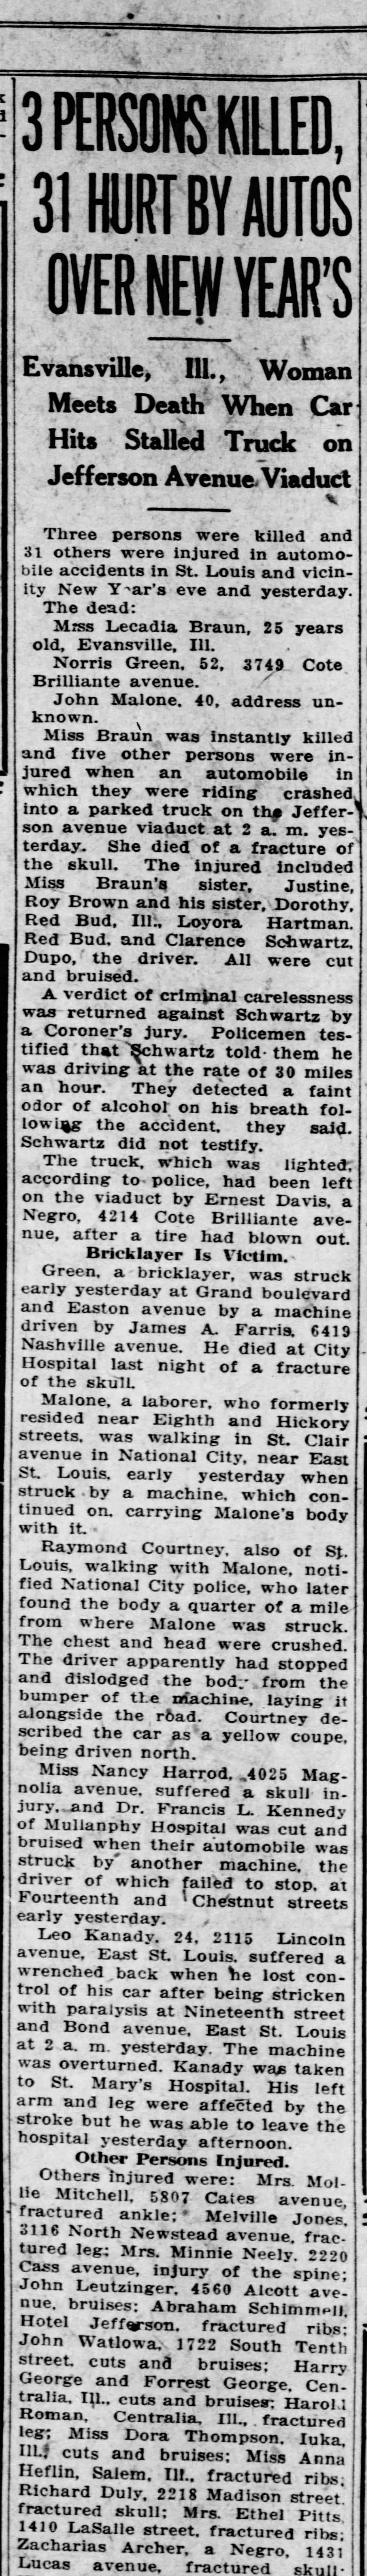 John Leutzinger hit by an automobile over New Year's 1929.  Full article